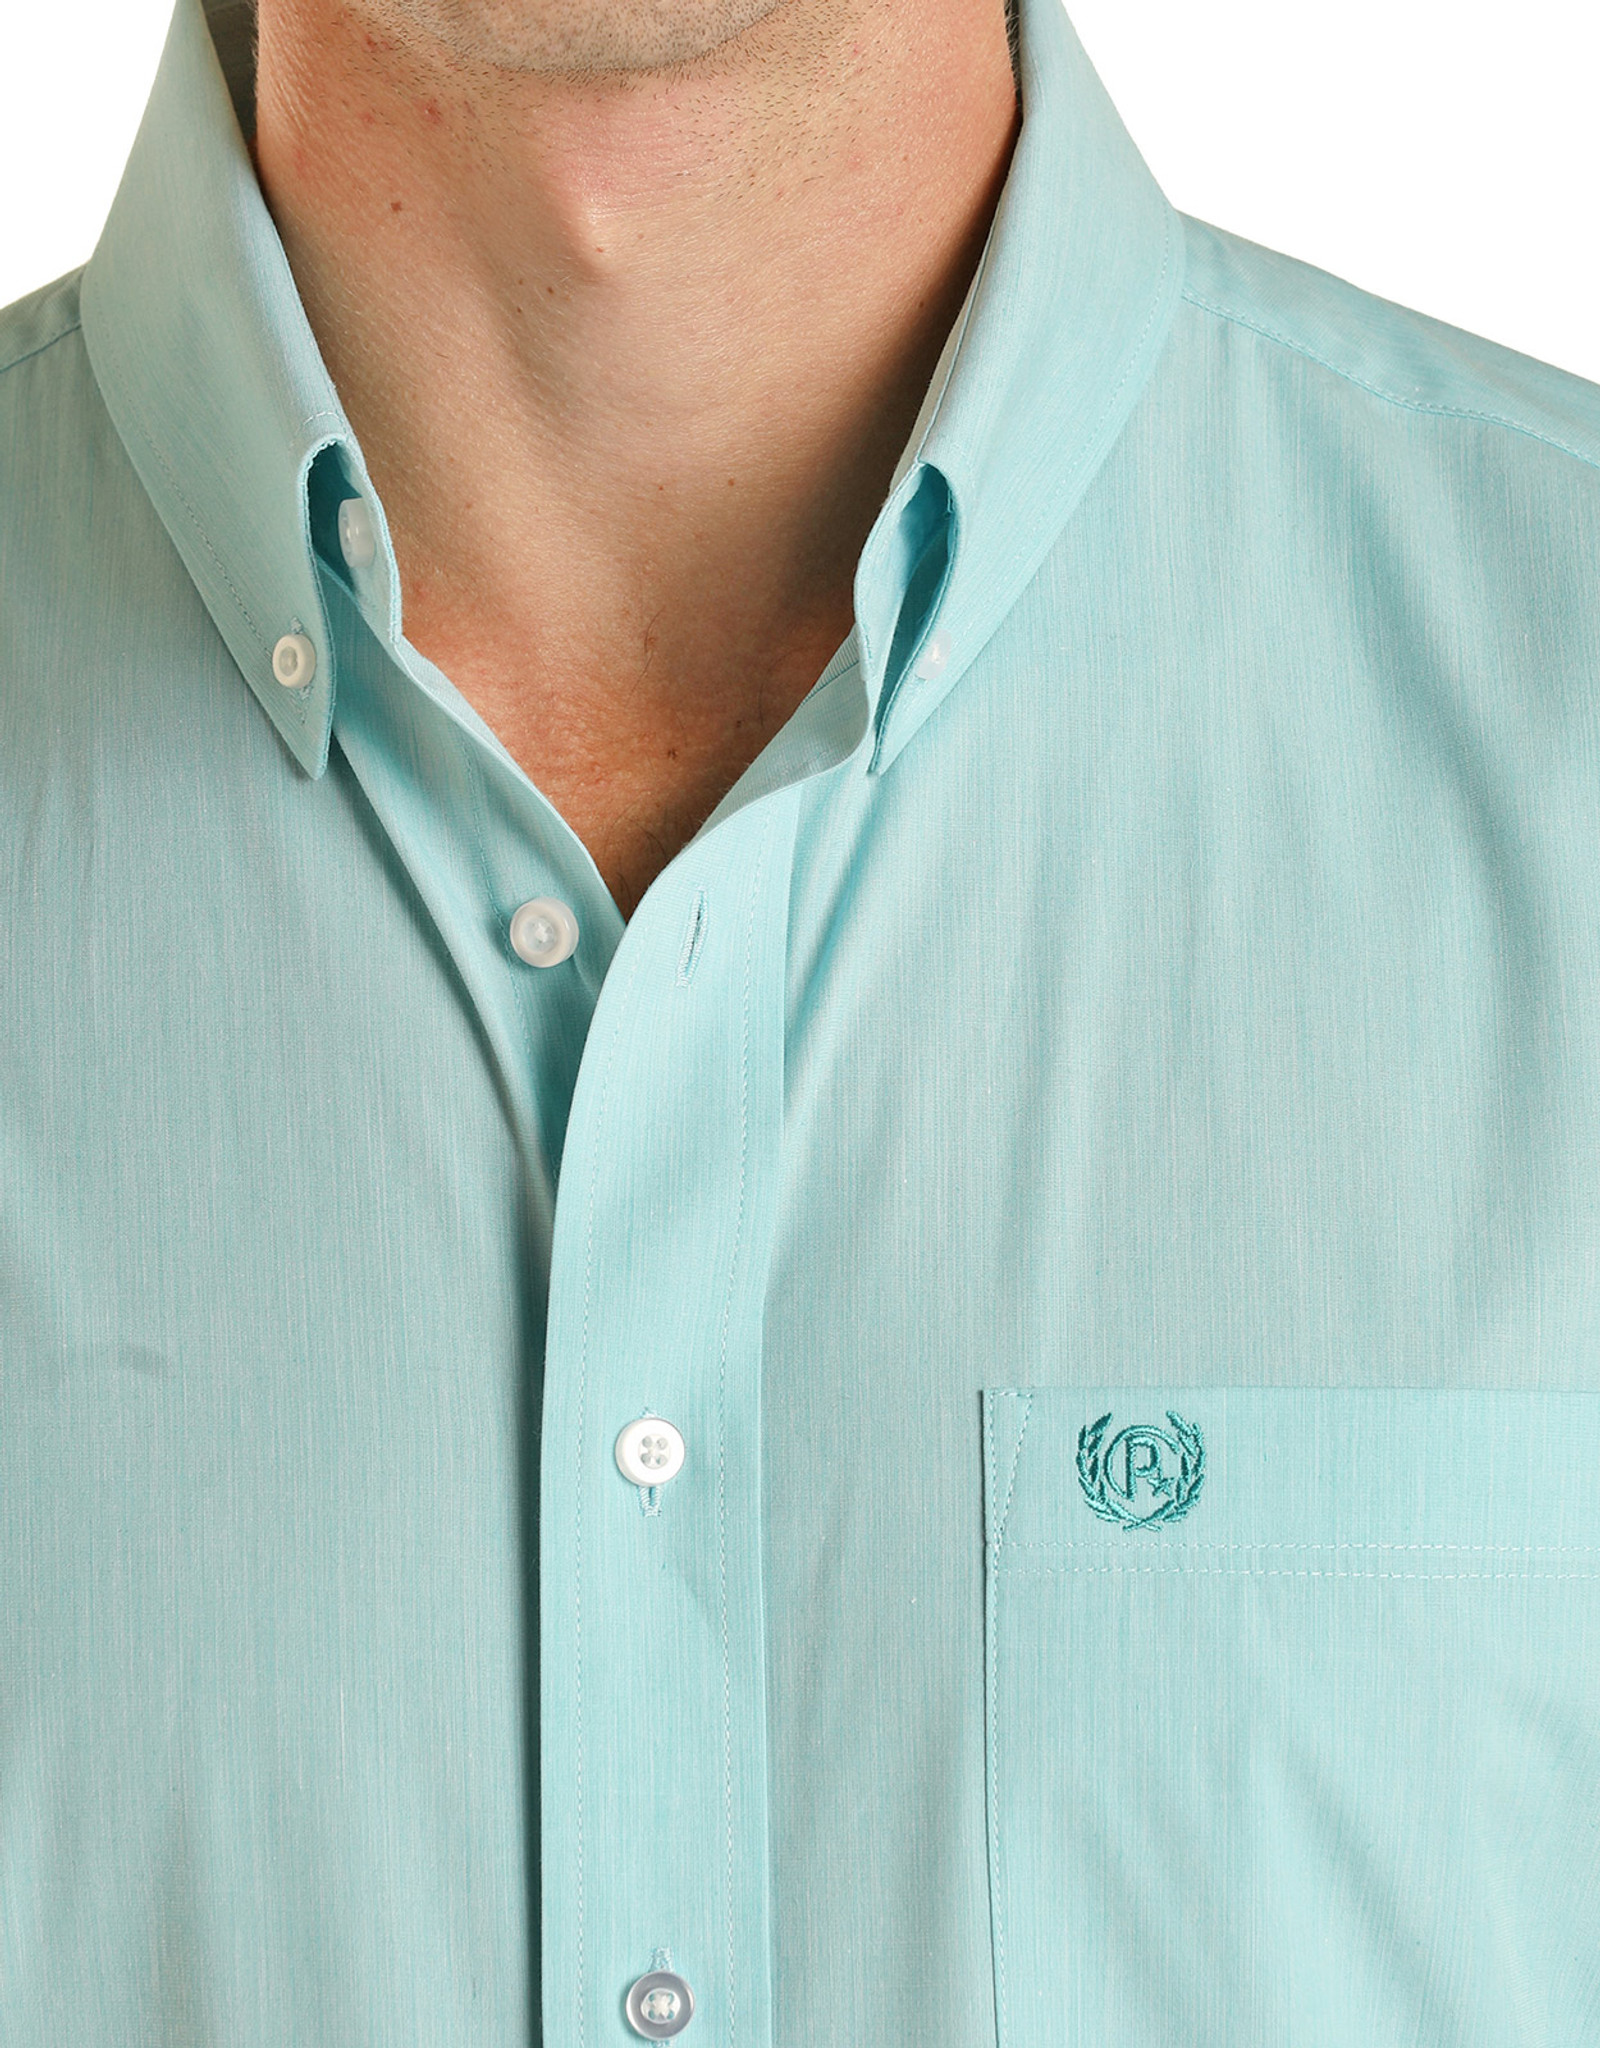 Panhandle Select Men's Long Sleeve Solid Button Down Shirt - Turquoise (Closeout)